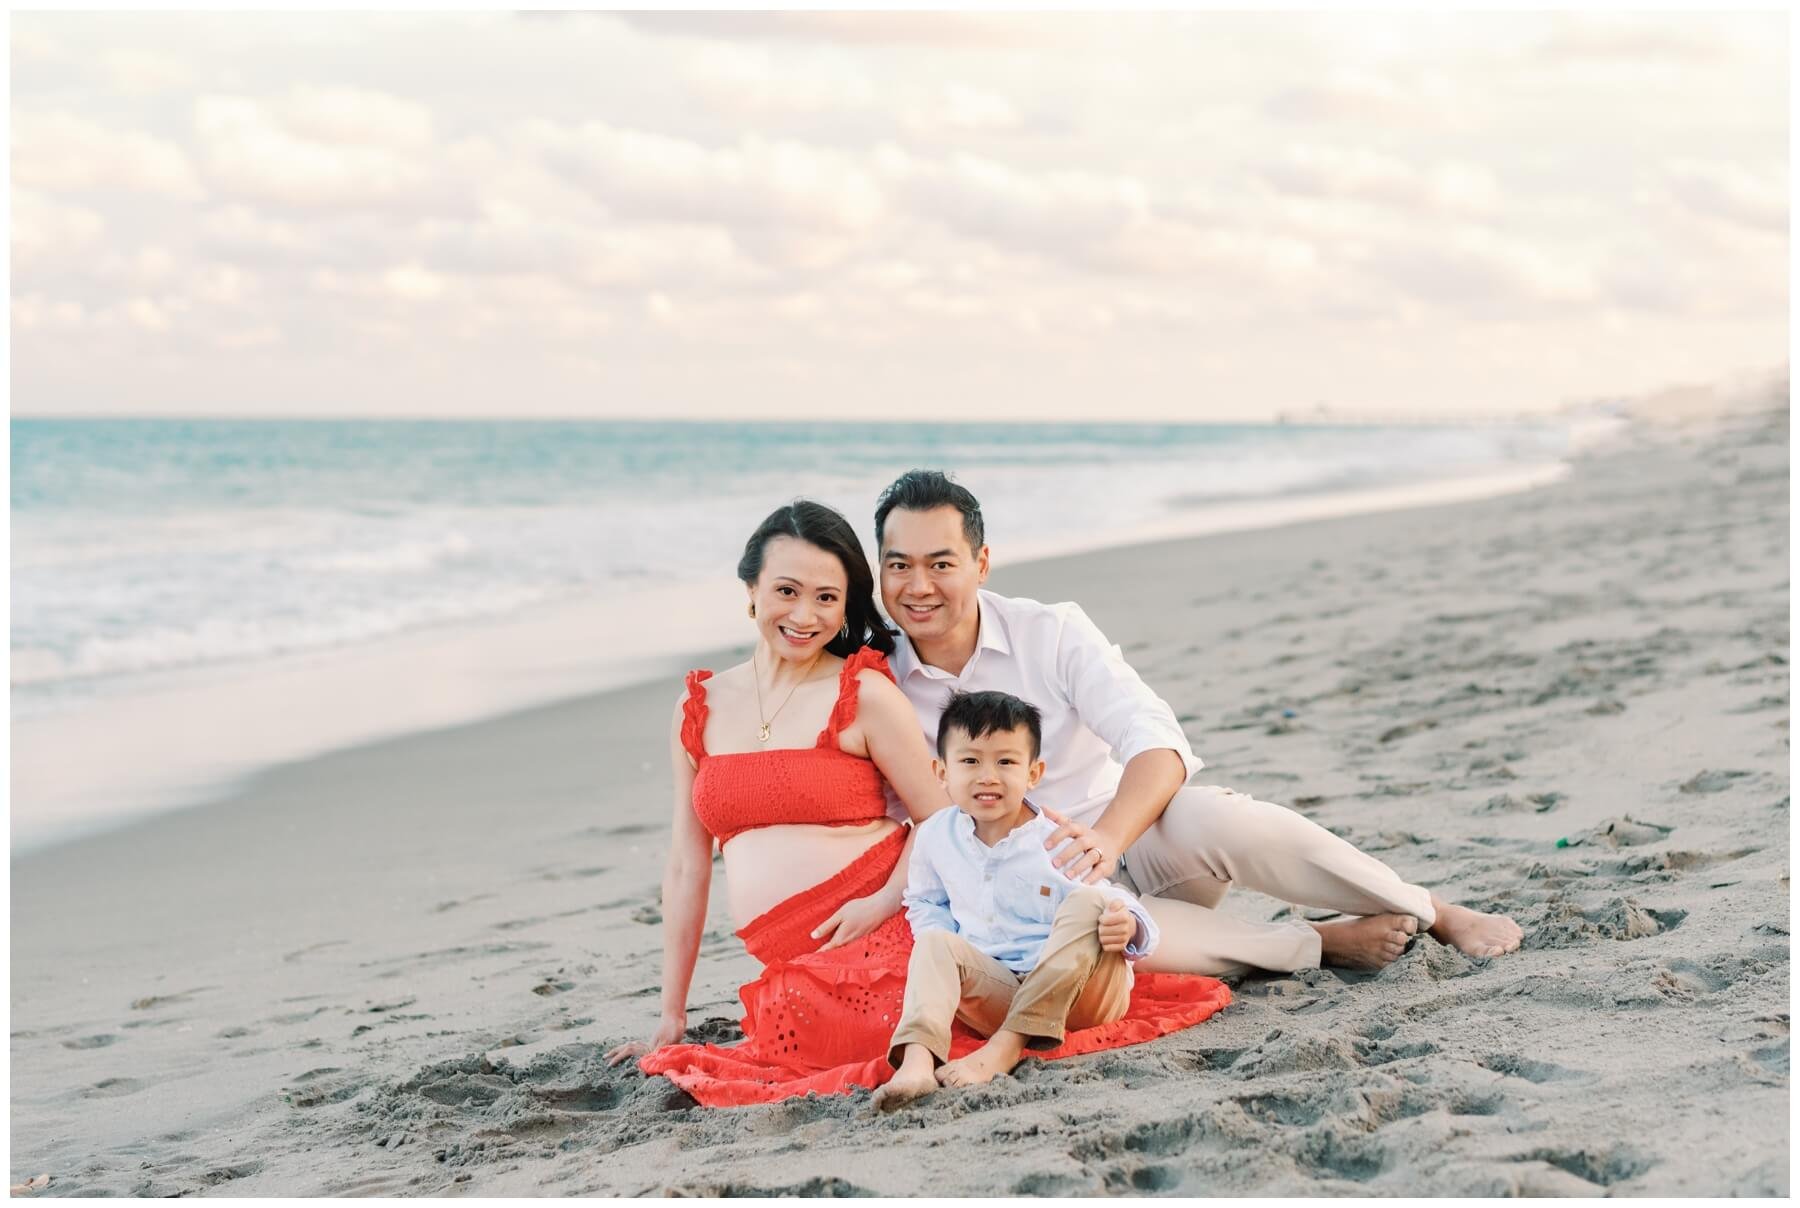 Family sitting on beach during maternity session | NKB Photo